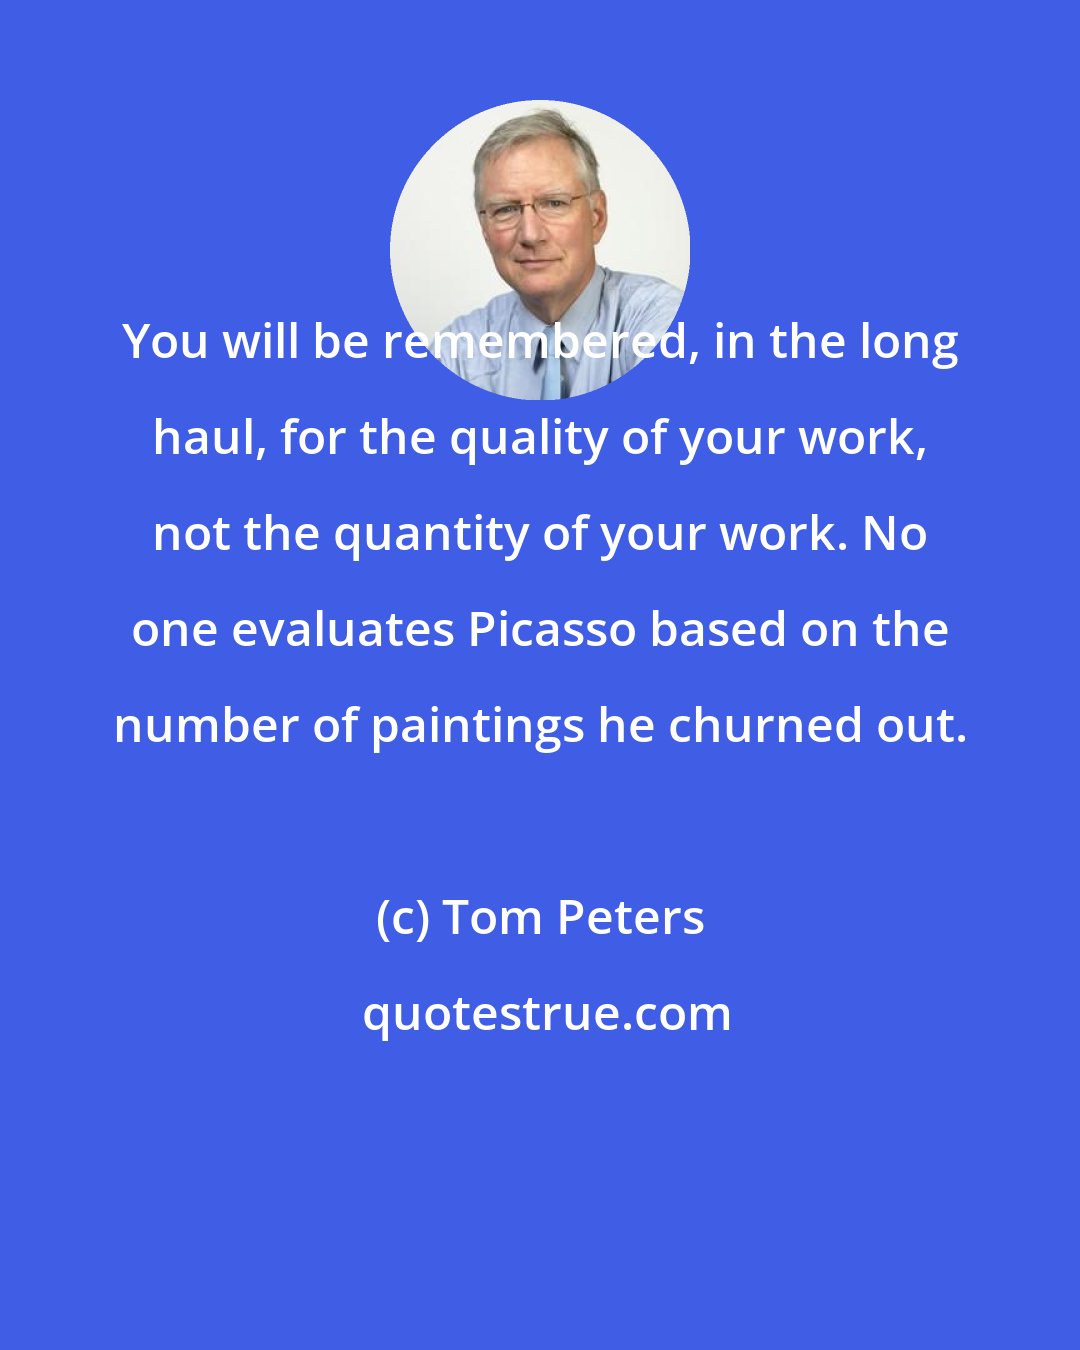 Tom Peters: You will be remembered, in the long haul, for the quality of your work, not the quantity of your work. No one evaluates Picasso based on the number of paintings he churned out.